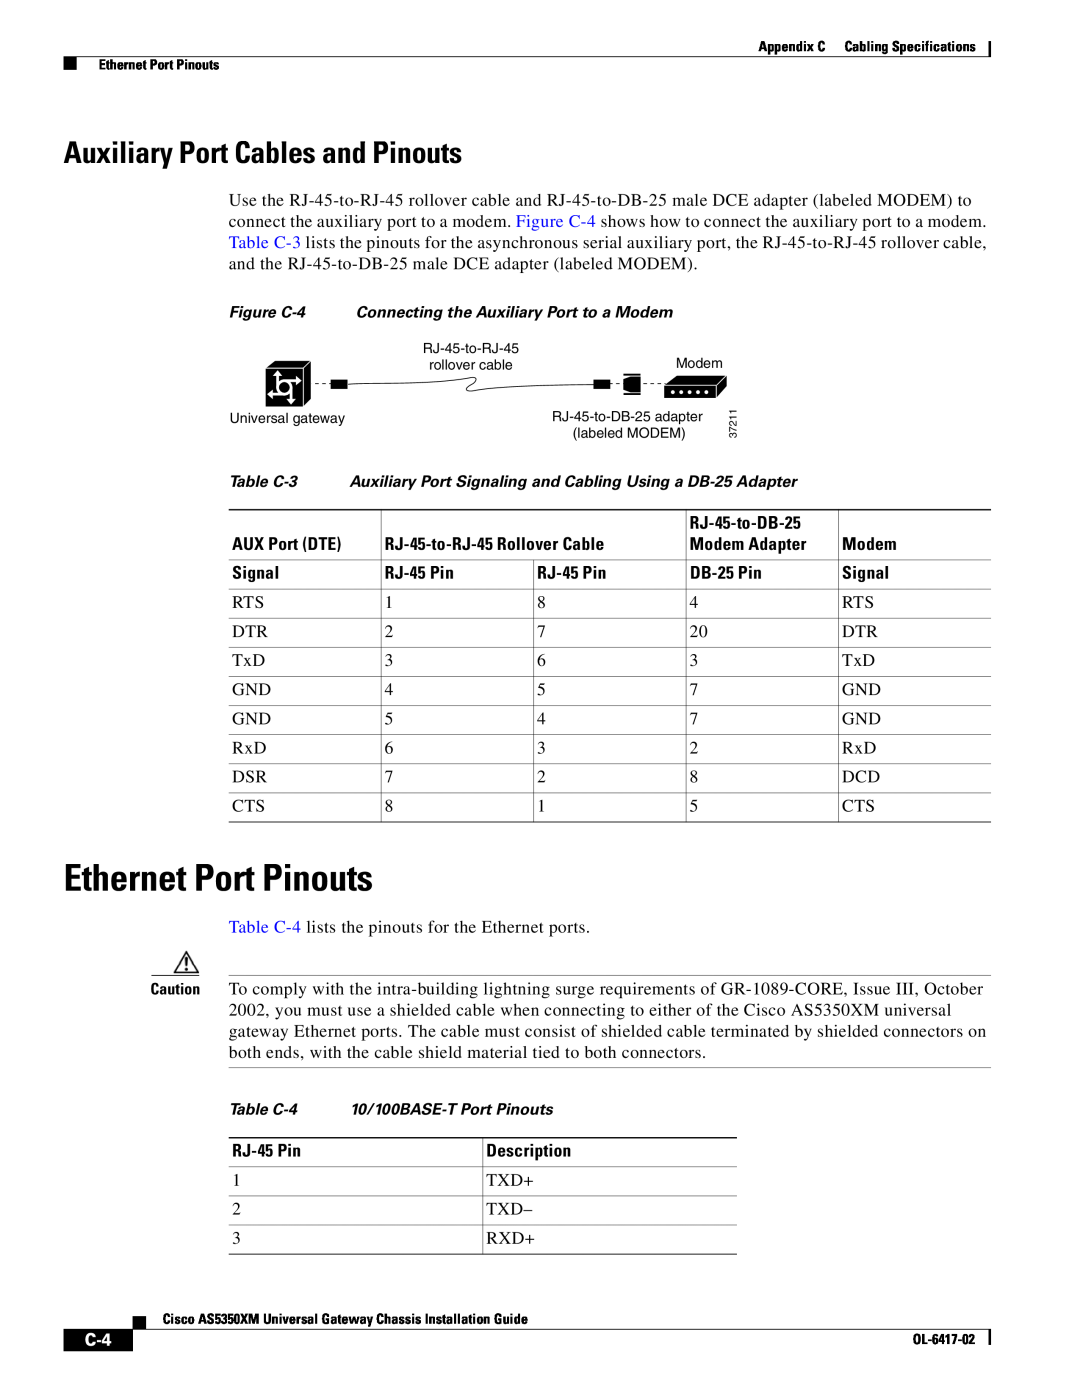 Cisco Systems AS5350XM manual Ethernet Port Pinouts, Auxiliary Port Cables and Pinouts 